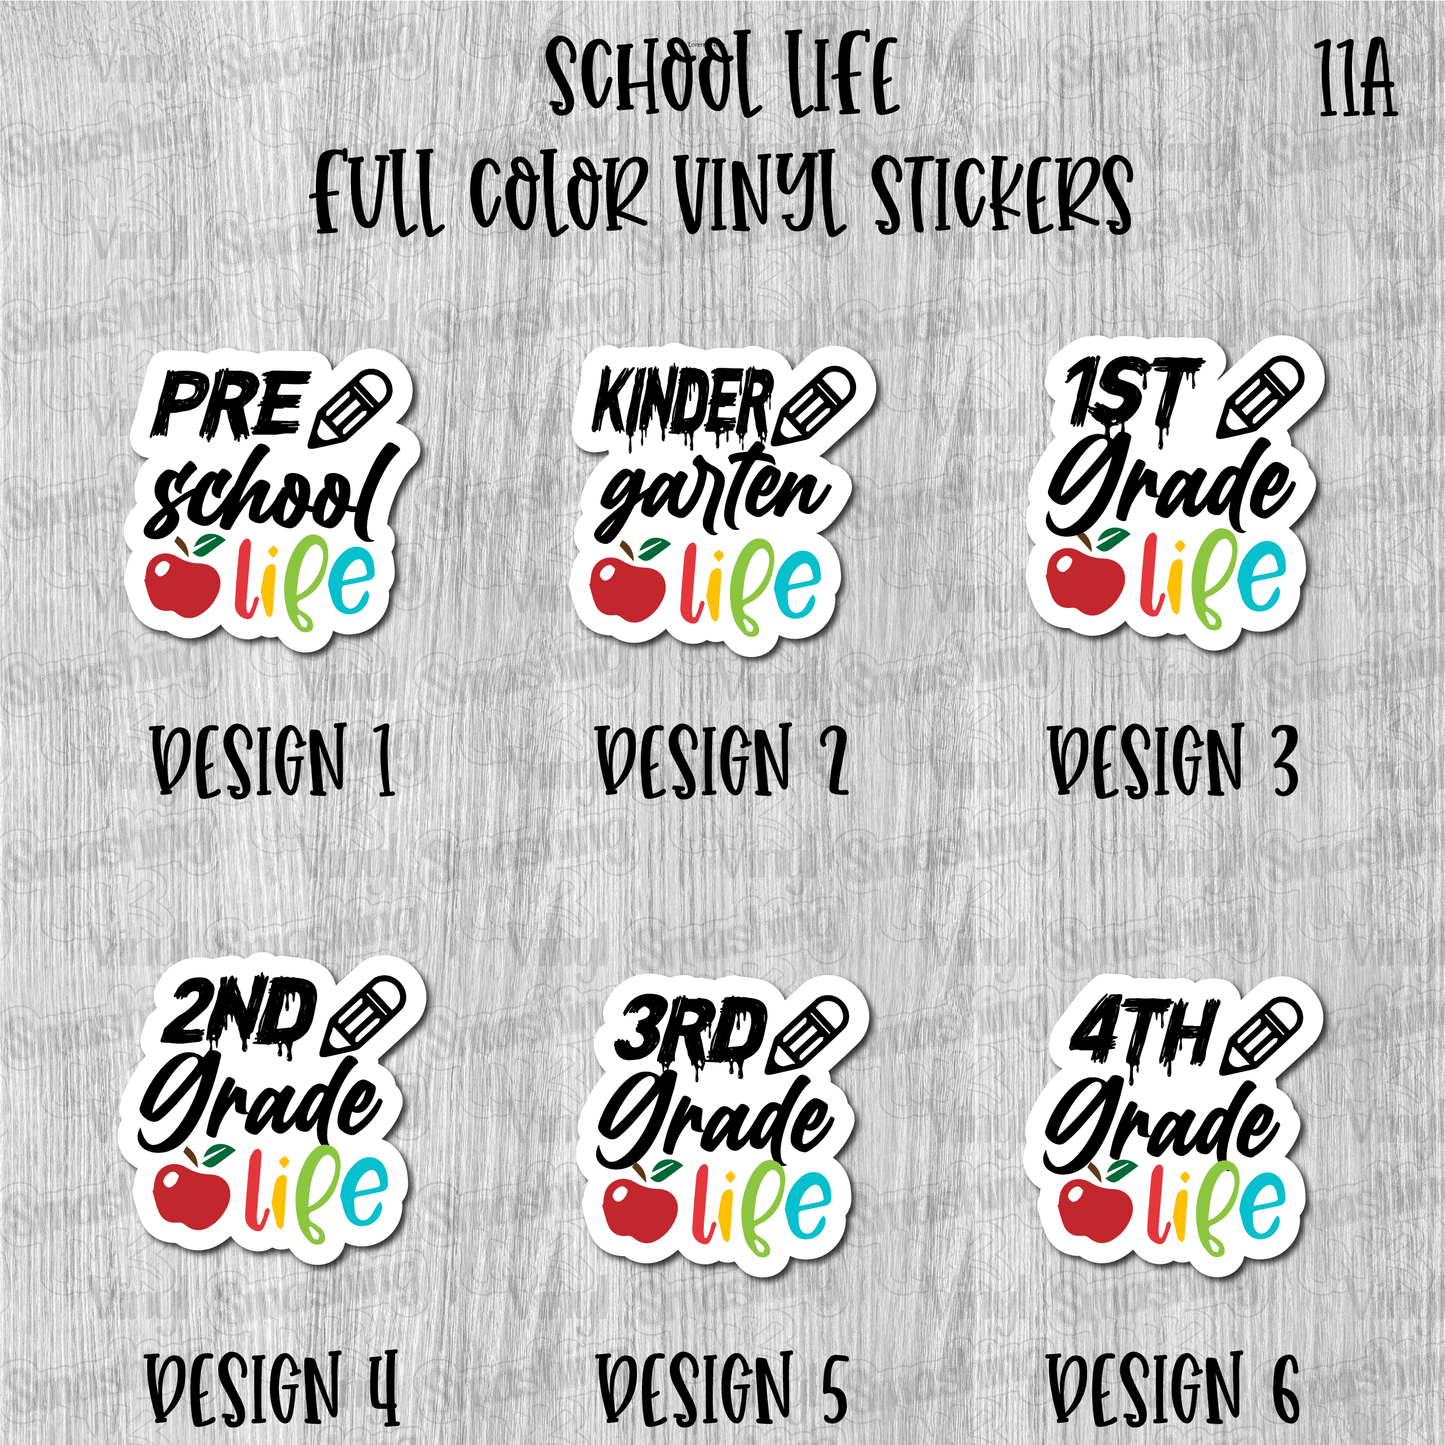 School Life - Full Color Vinyl Stickers (SHIPS IN 3-7 BUS DAYS)